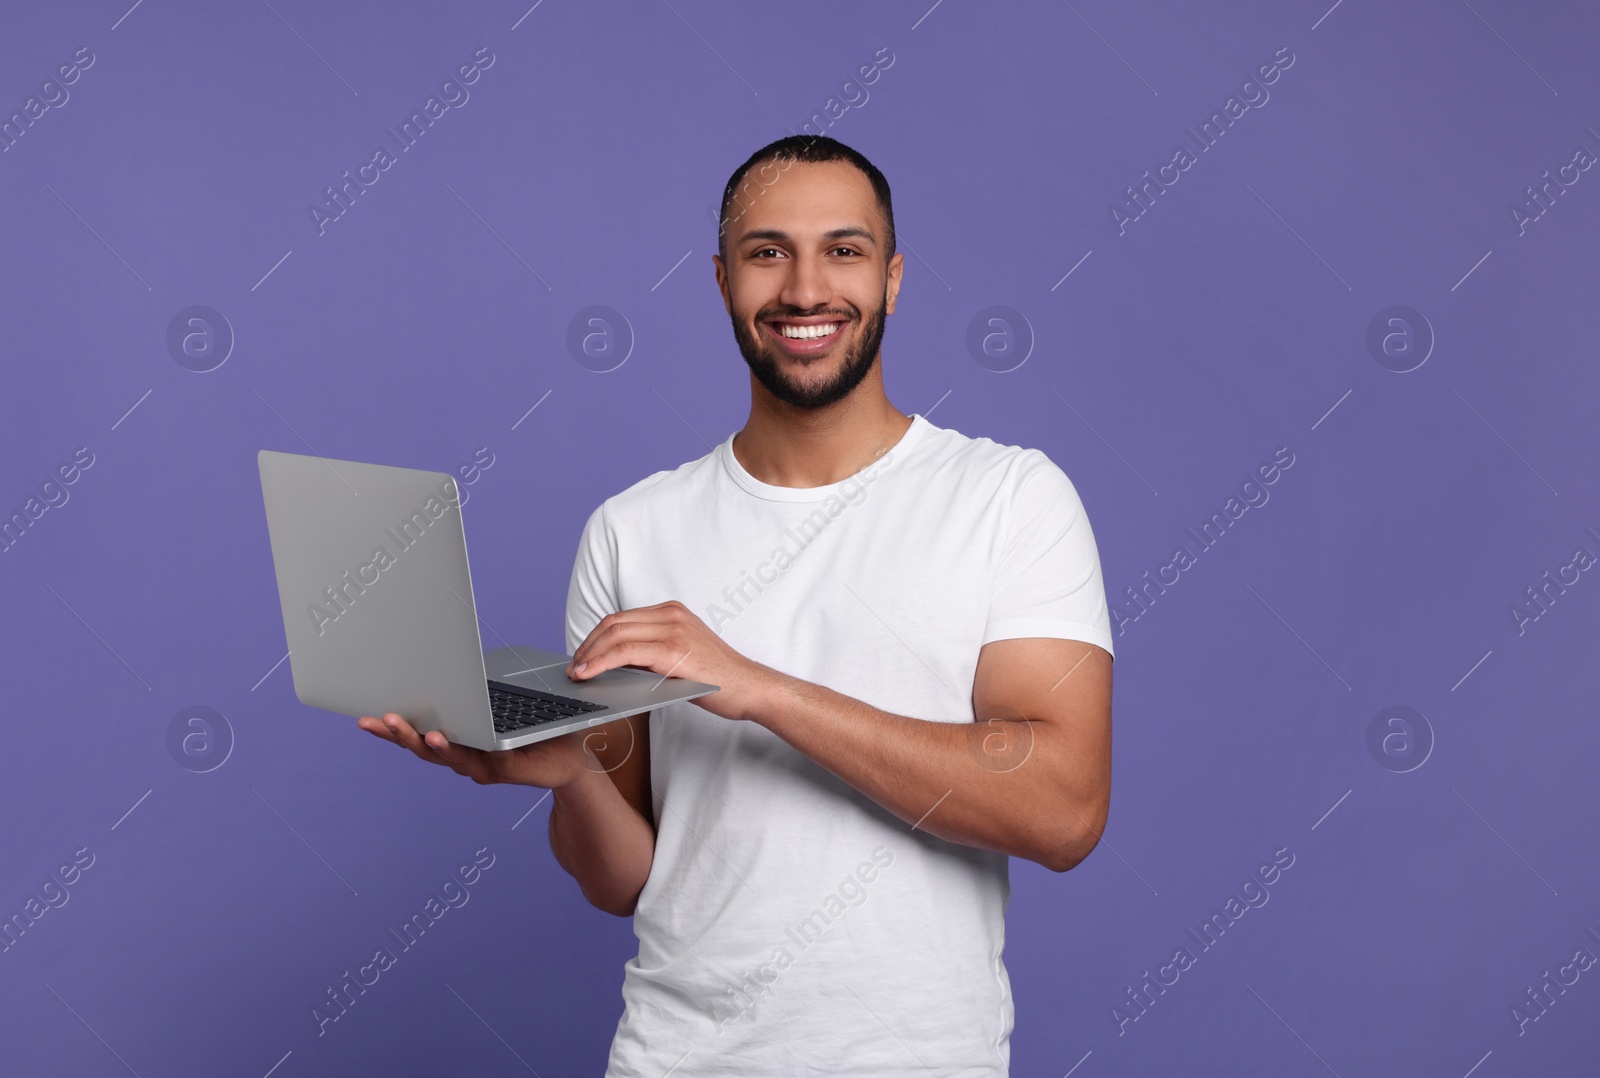 Photo of Smiling young man working with laptop on lilac background